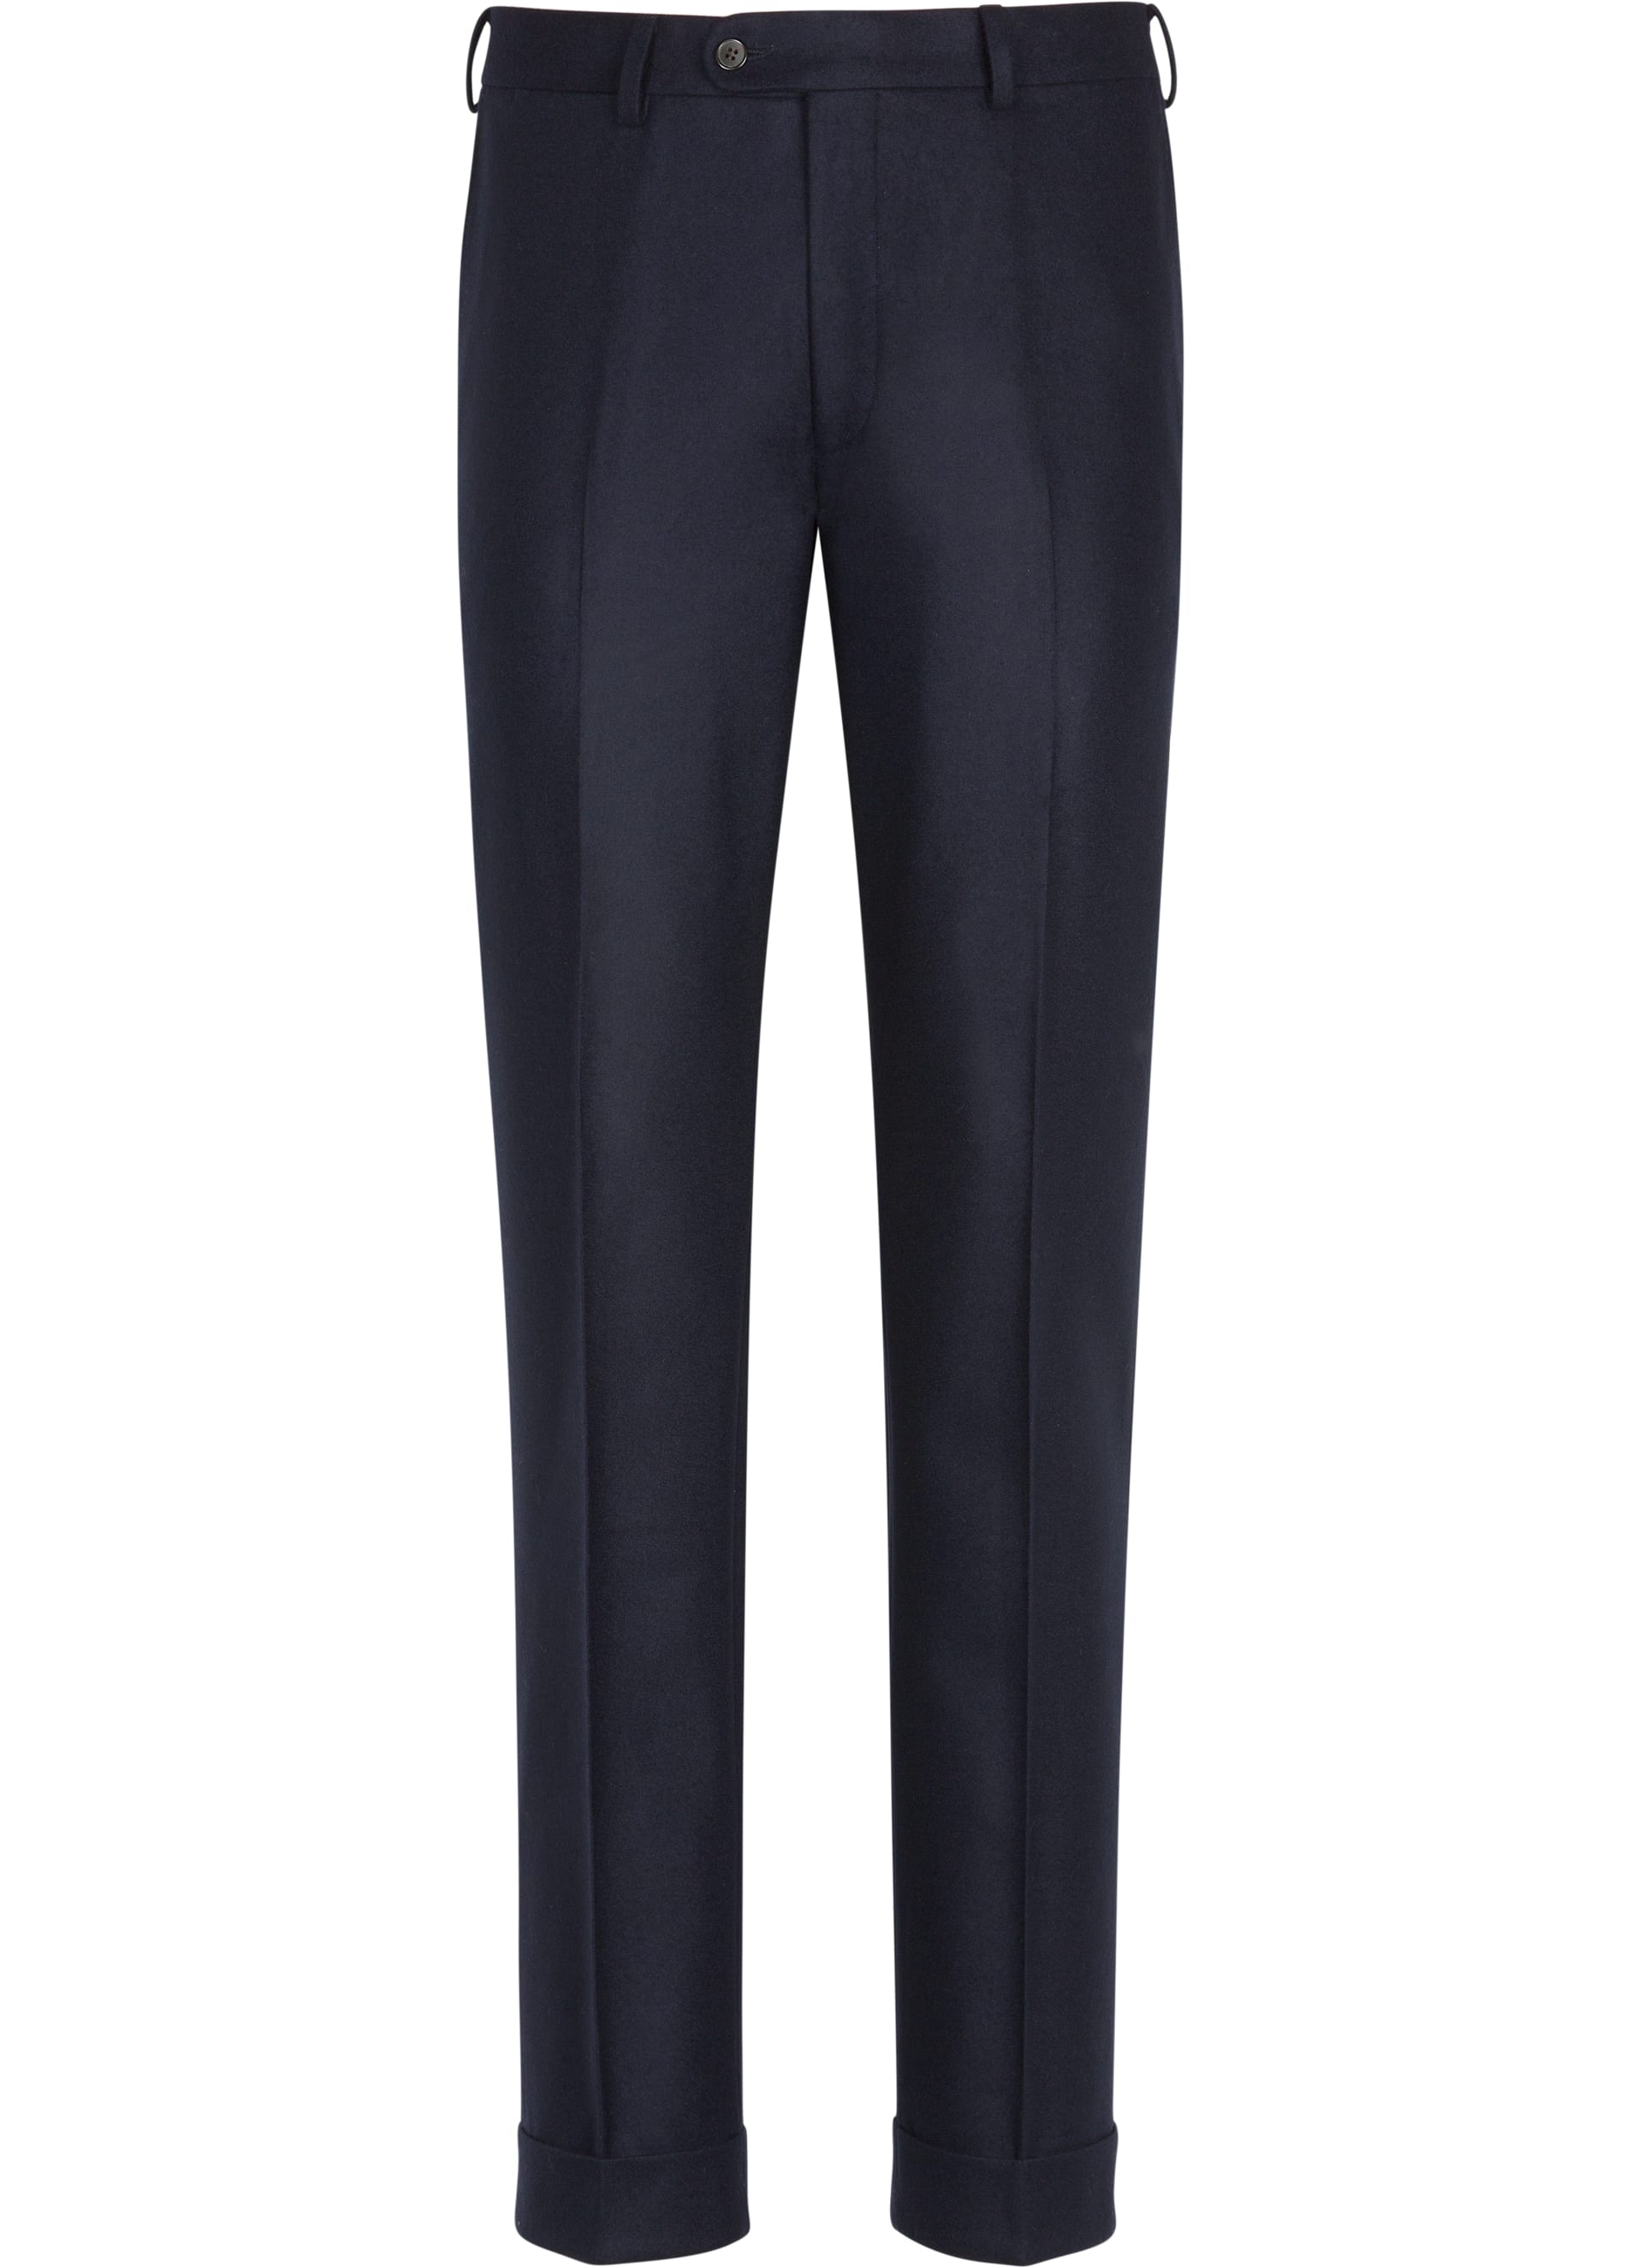 Navy Trousers B811i | Suitsupply Online Store